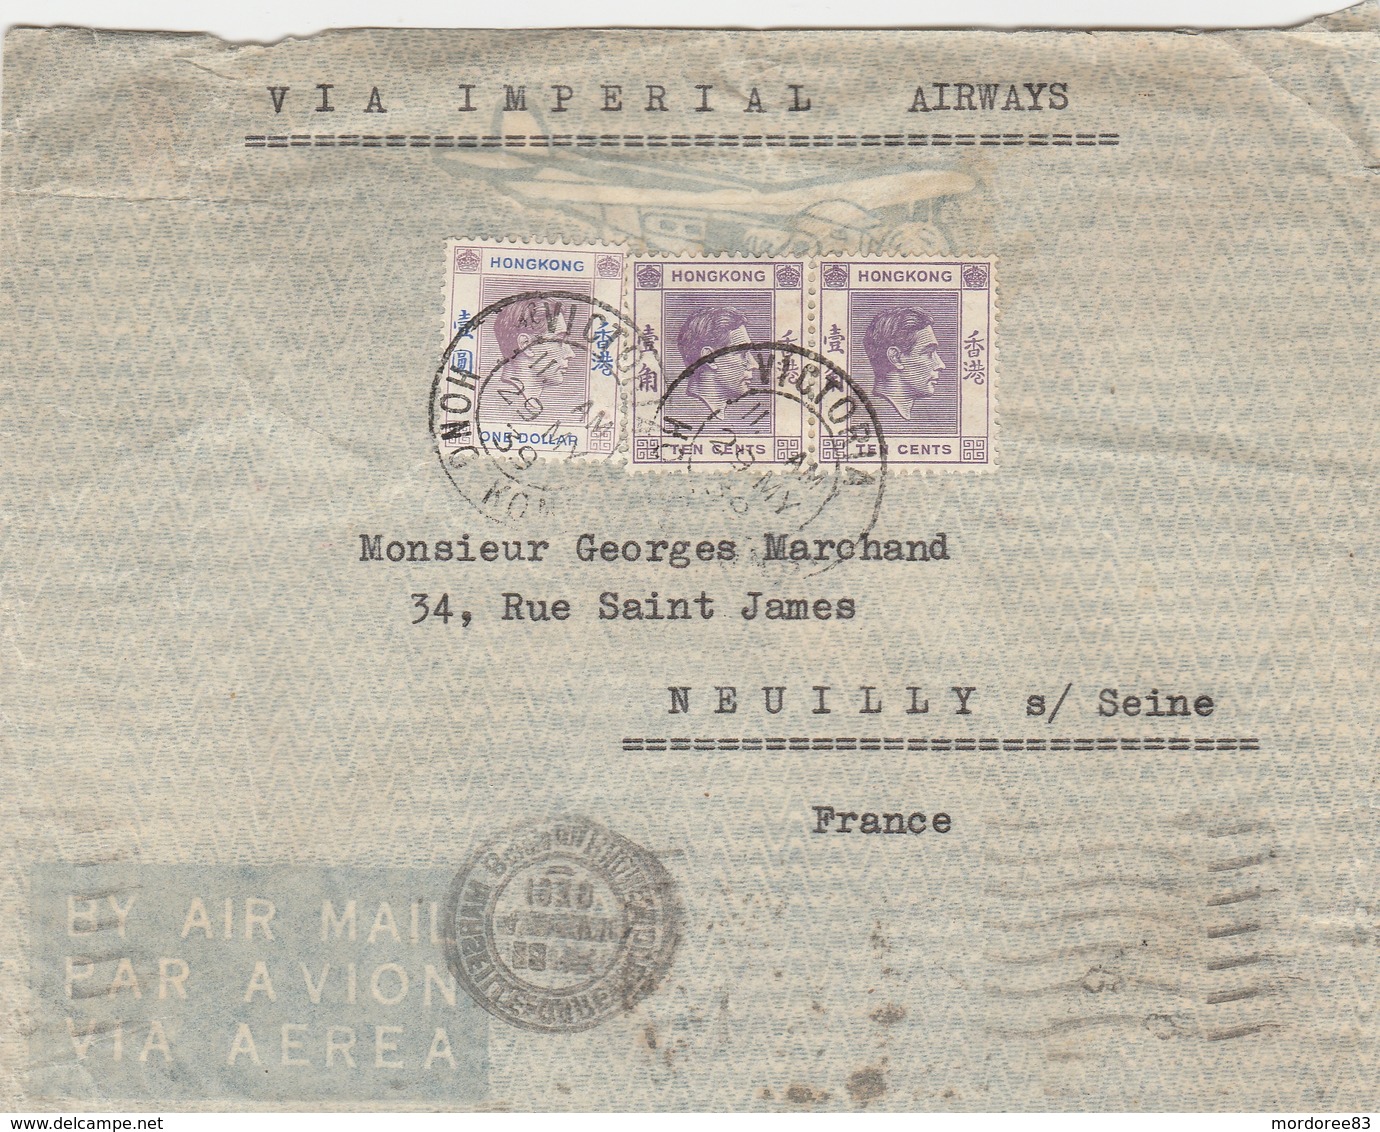 HONG KONG GEORGE VI 1 DOLLAR + PAIRE 10 C YT 153+145 SUR LETTRE VIA IMPERIAL AIRWAYS VICTORIA 29/5/39 FRANCE NEUILLY S/S - Covers & Documents